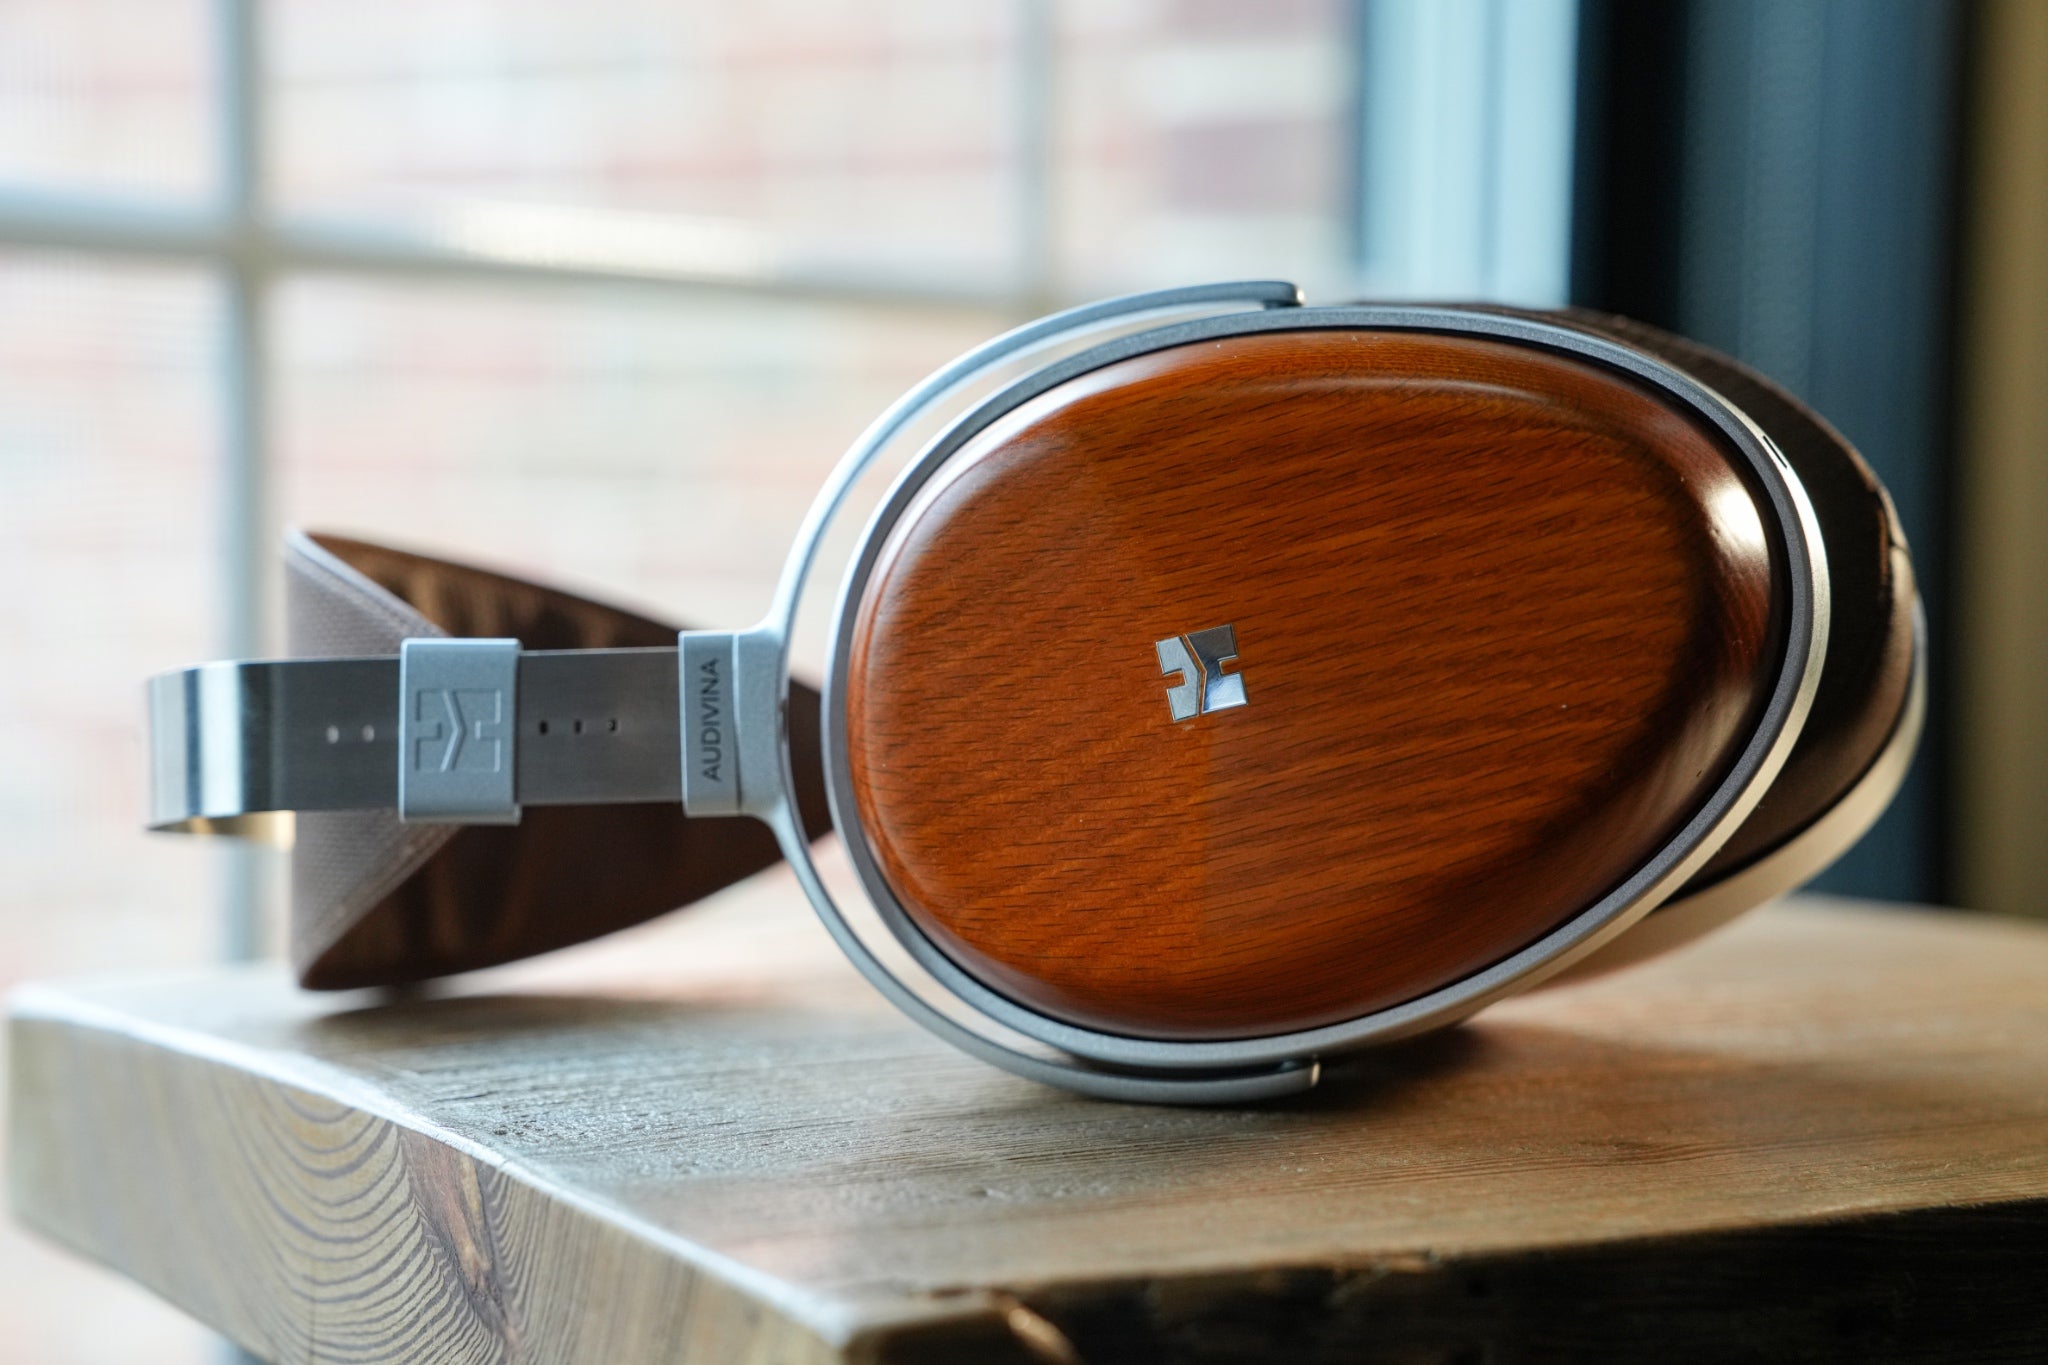 HiFiMAN Audivina headphone on wooden table in front of window from Bloom Audio Gallery